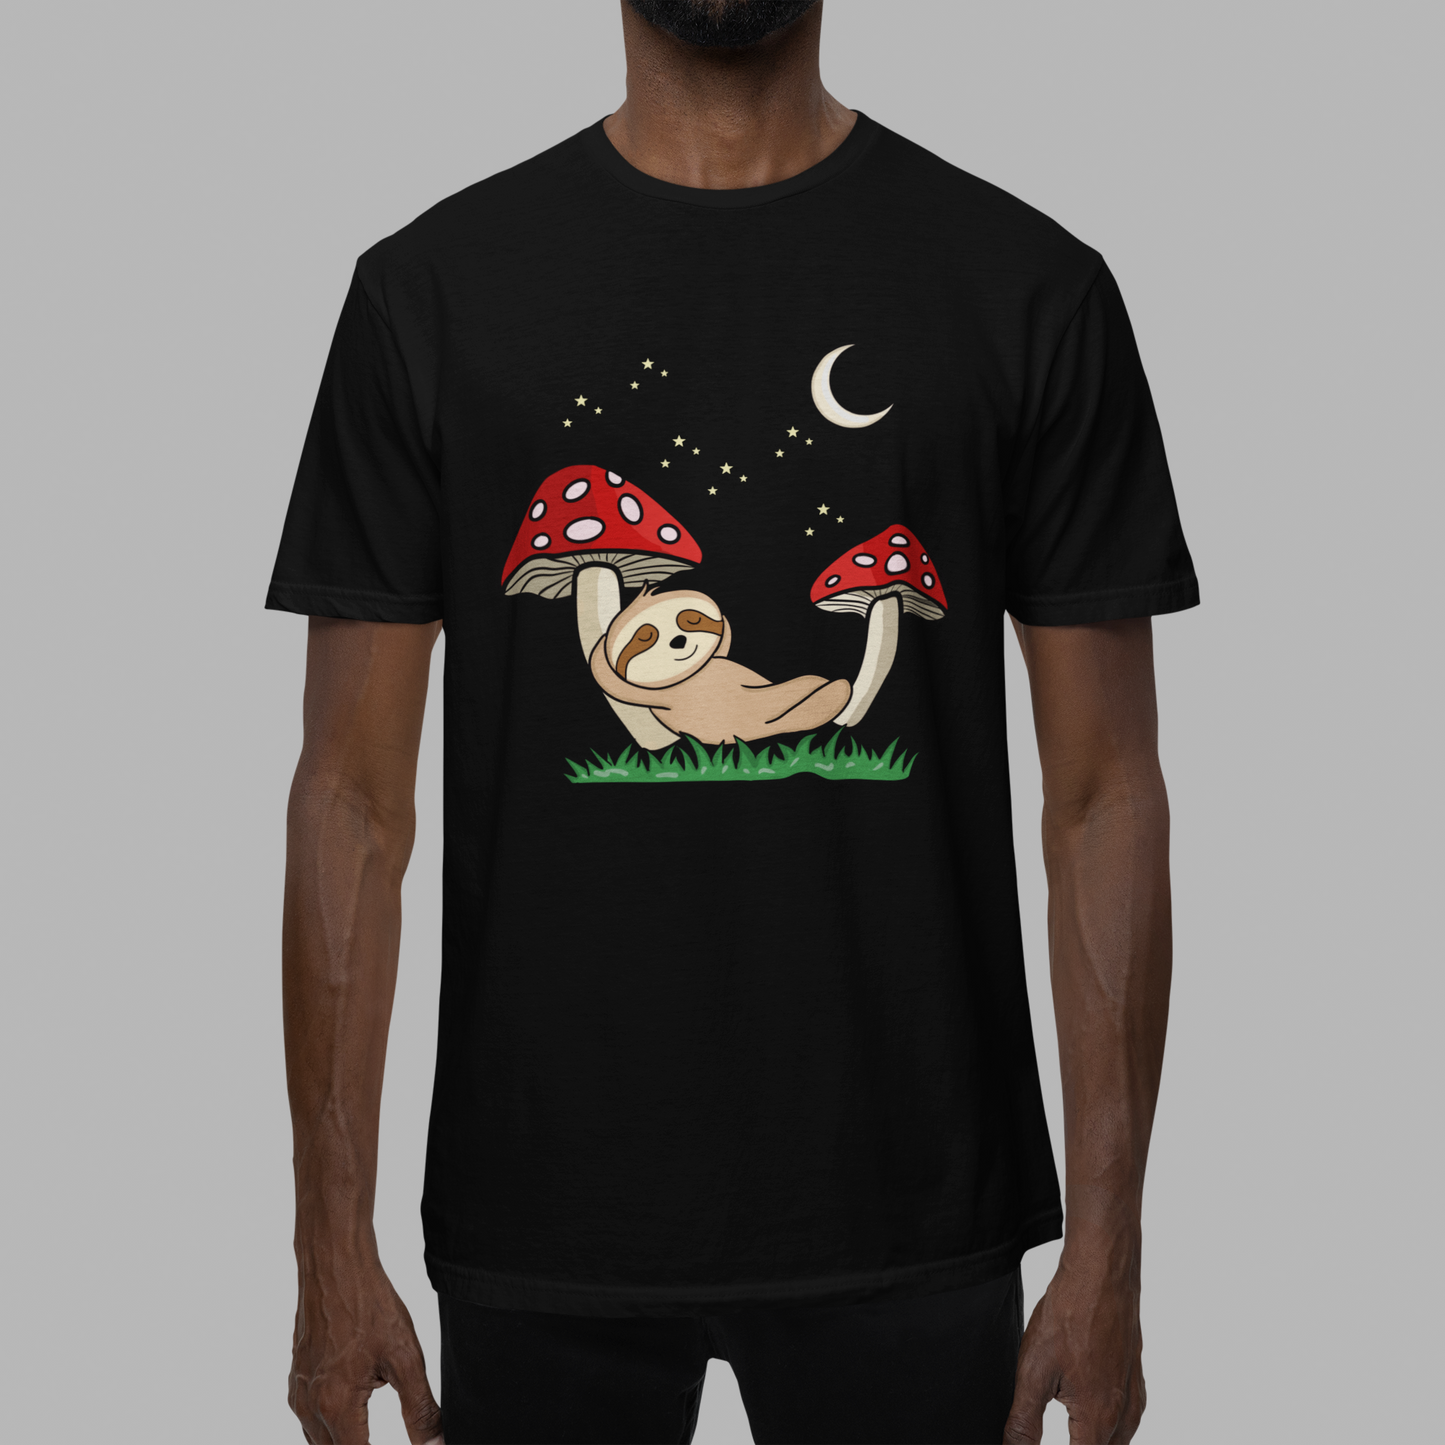 Lazy All Day Sloth T-Shirt